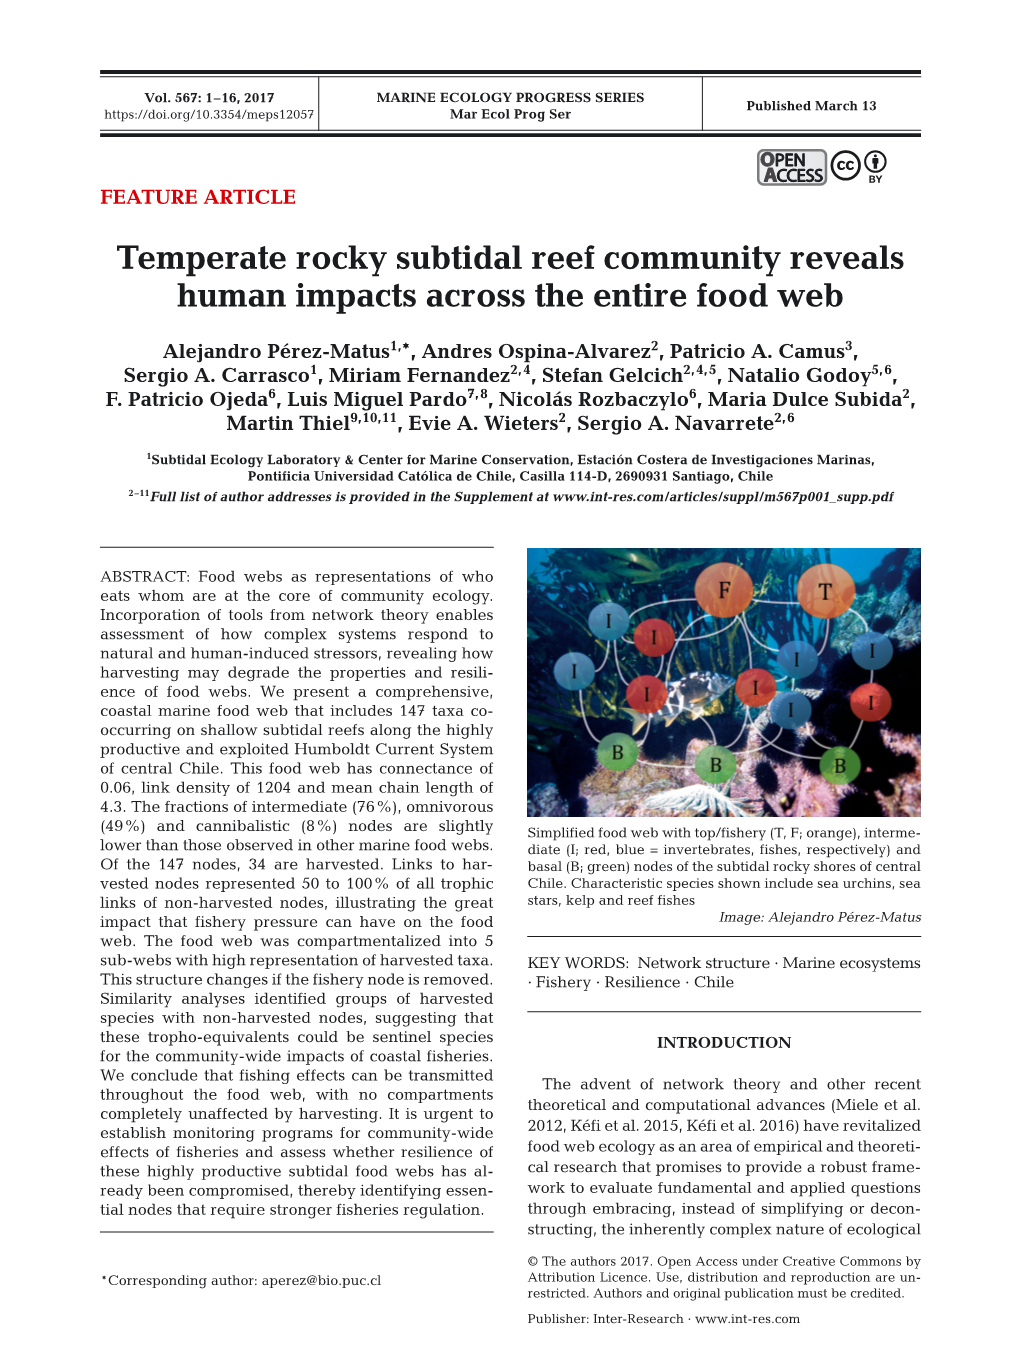 Temperate Rocky Subtidal Reef Community Reveals Human Impacts Across the Entire Food Web